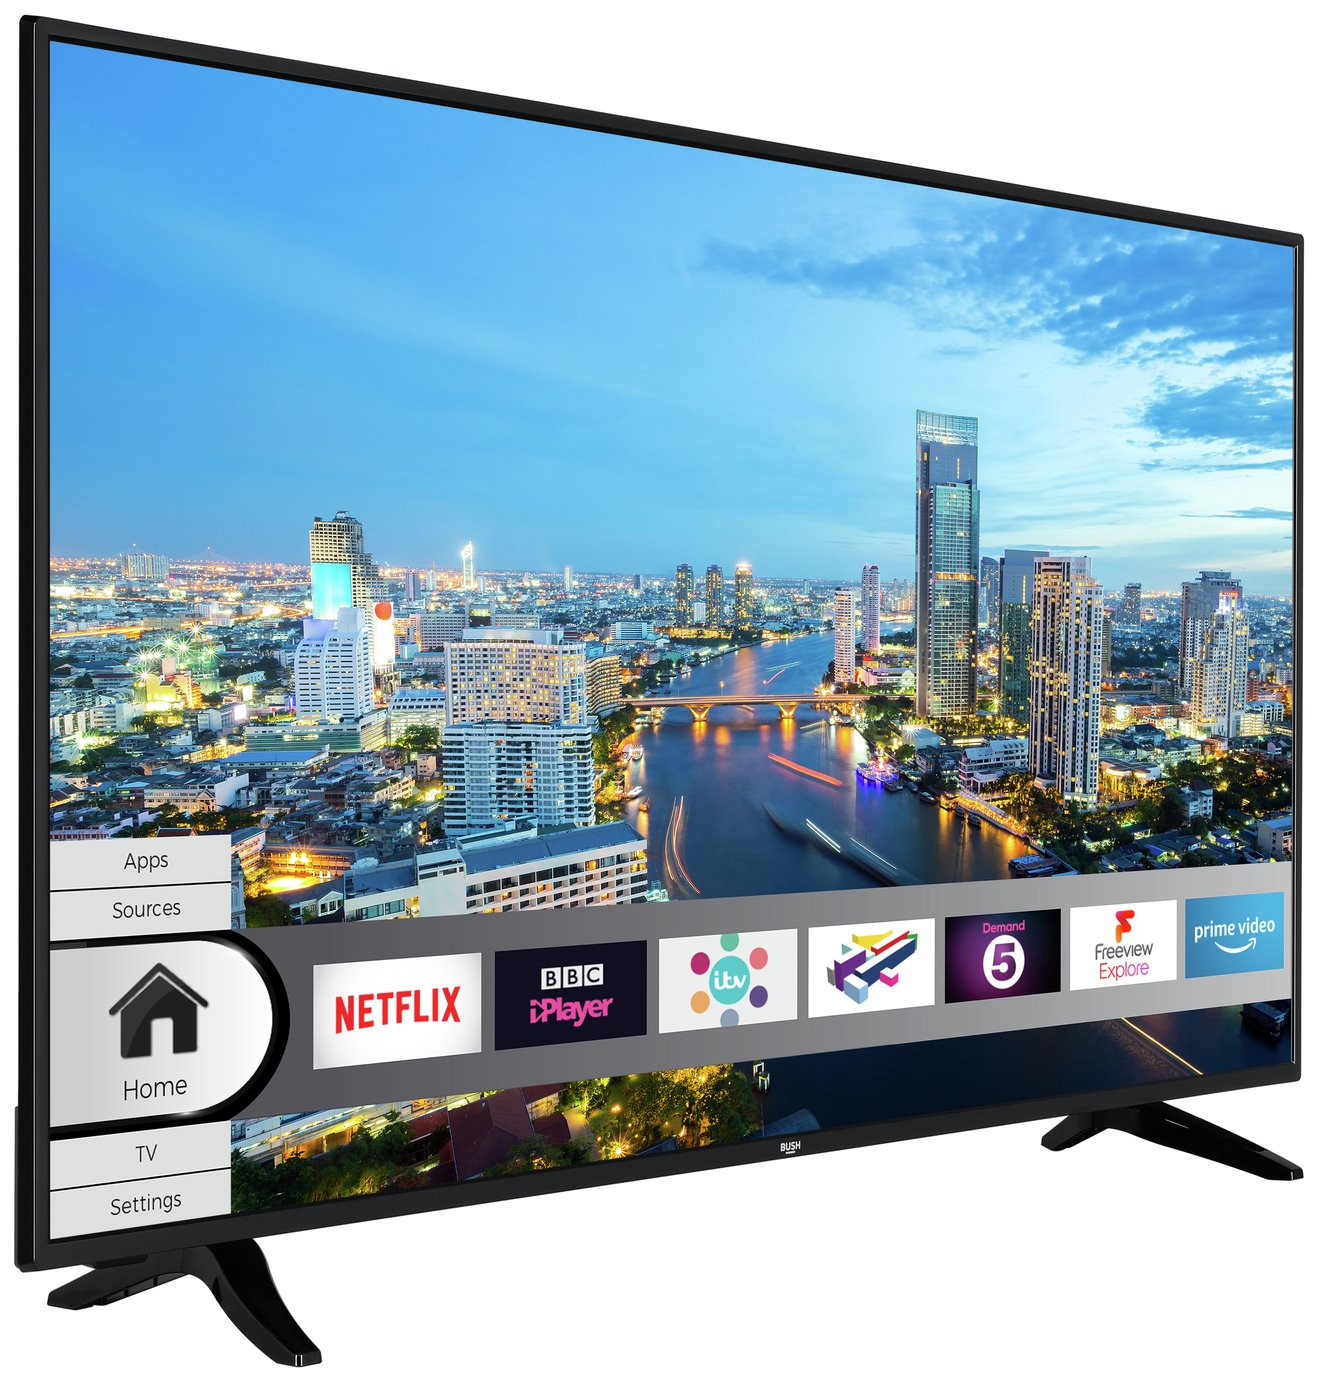 Bush 55 Inch Smart 4K UHD LED TV with HDR Review